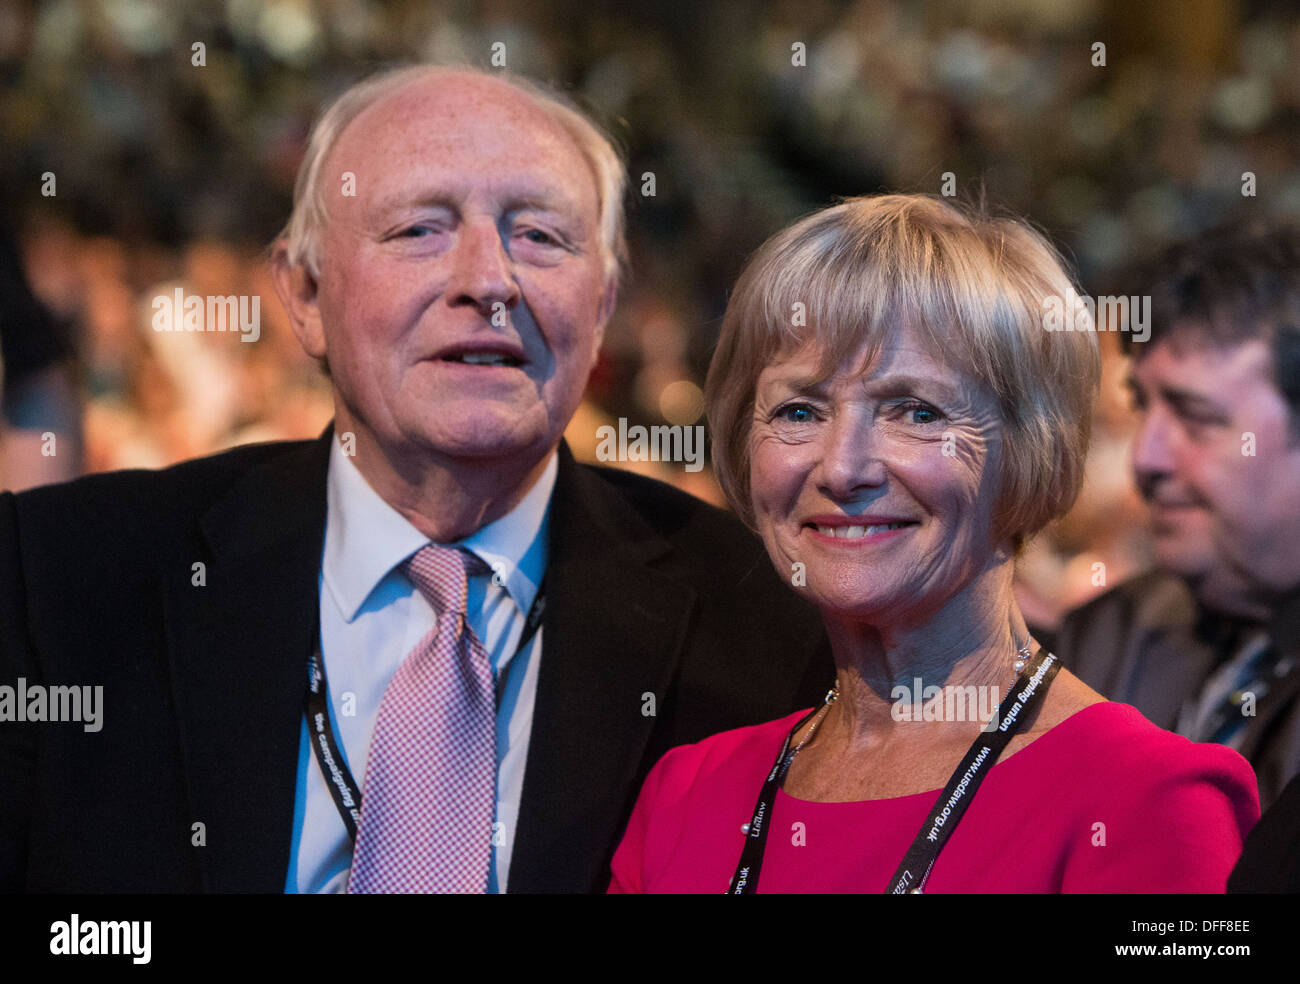 Neil and Glenys Kinnock at the Labour Party conference in Brighton 2013 Stock Photo